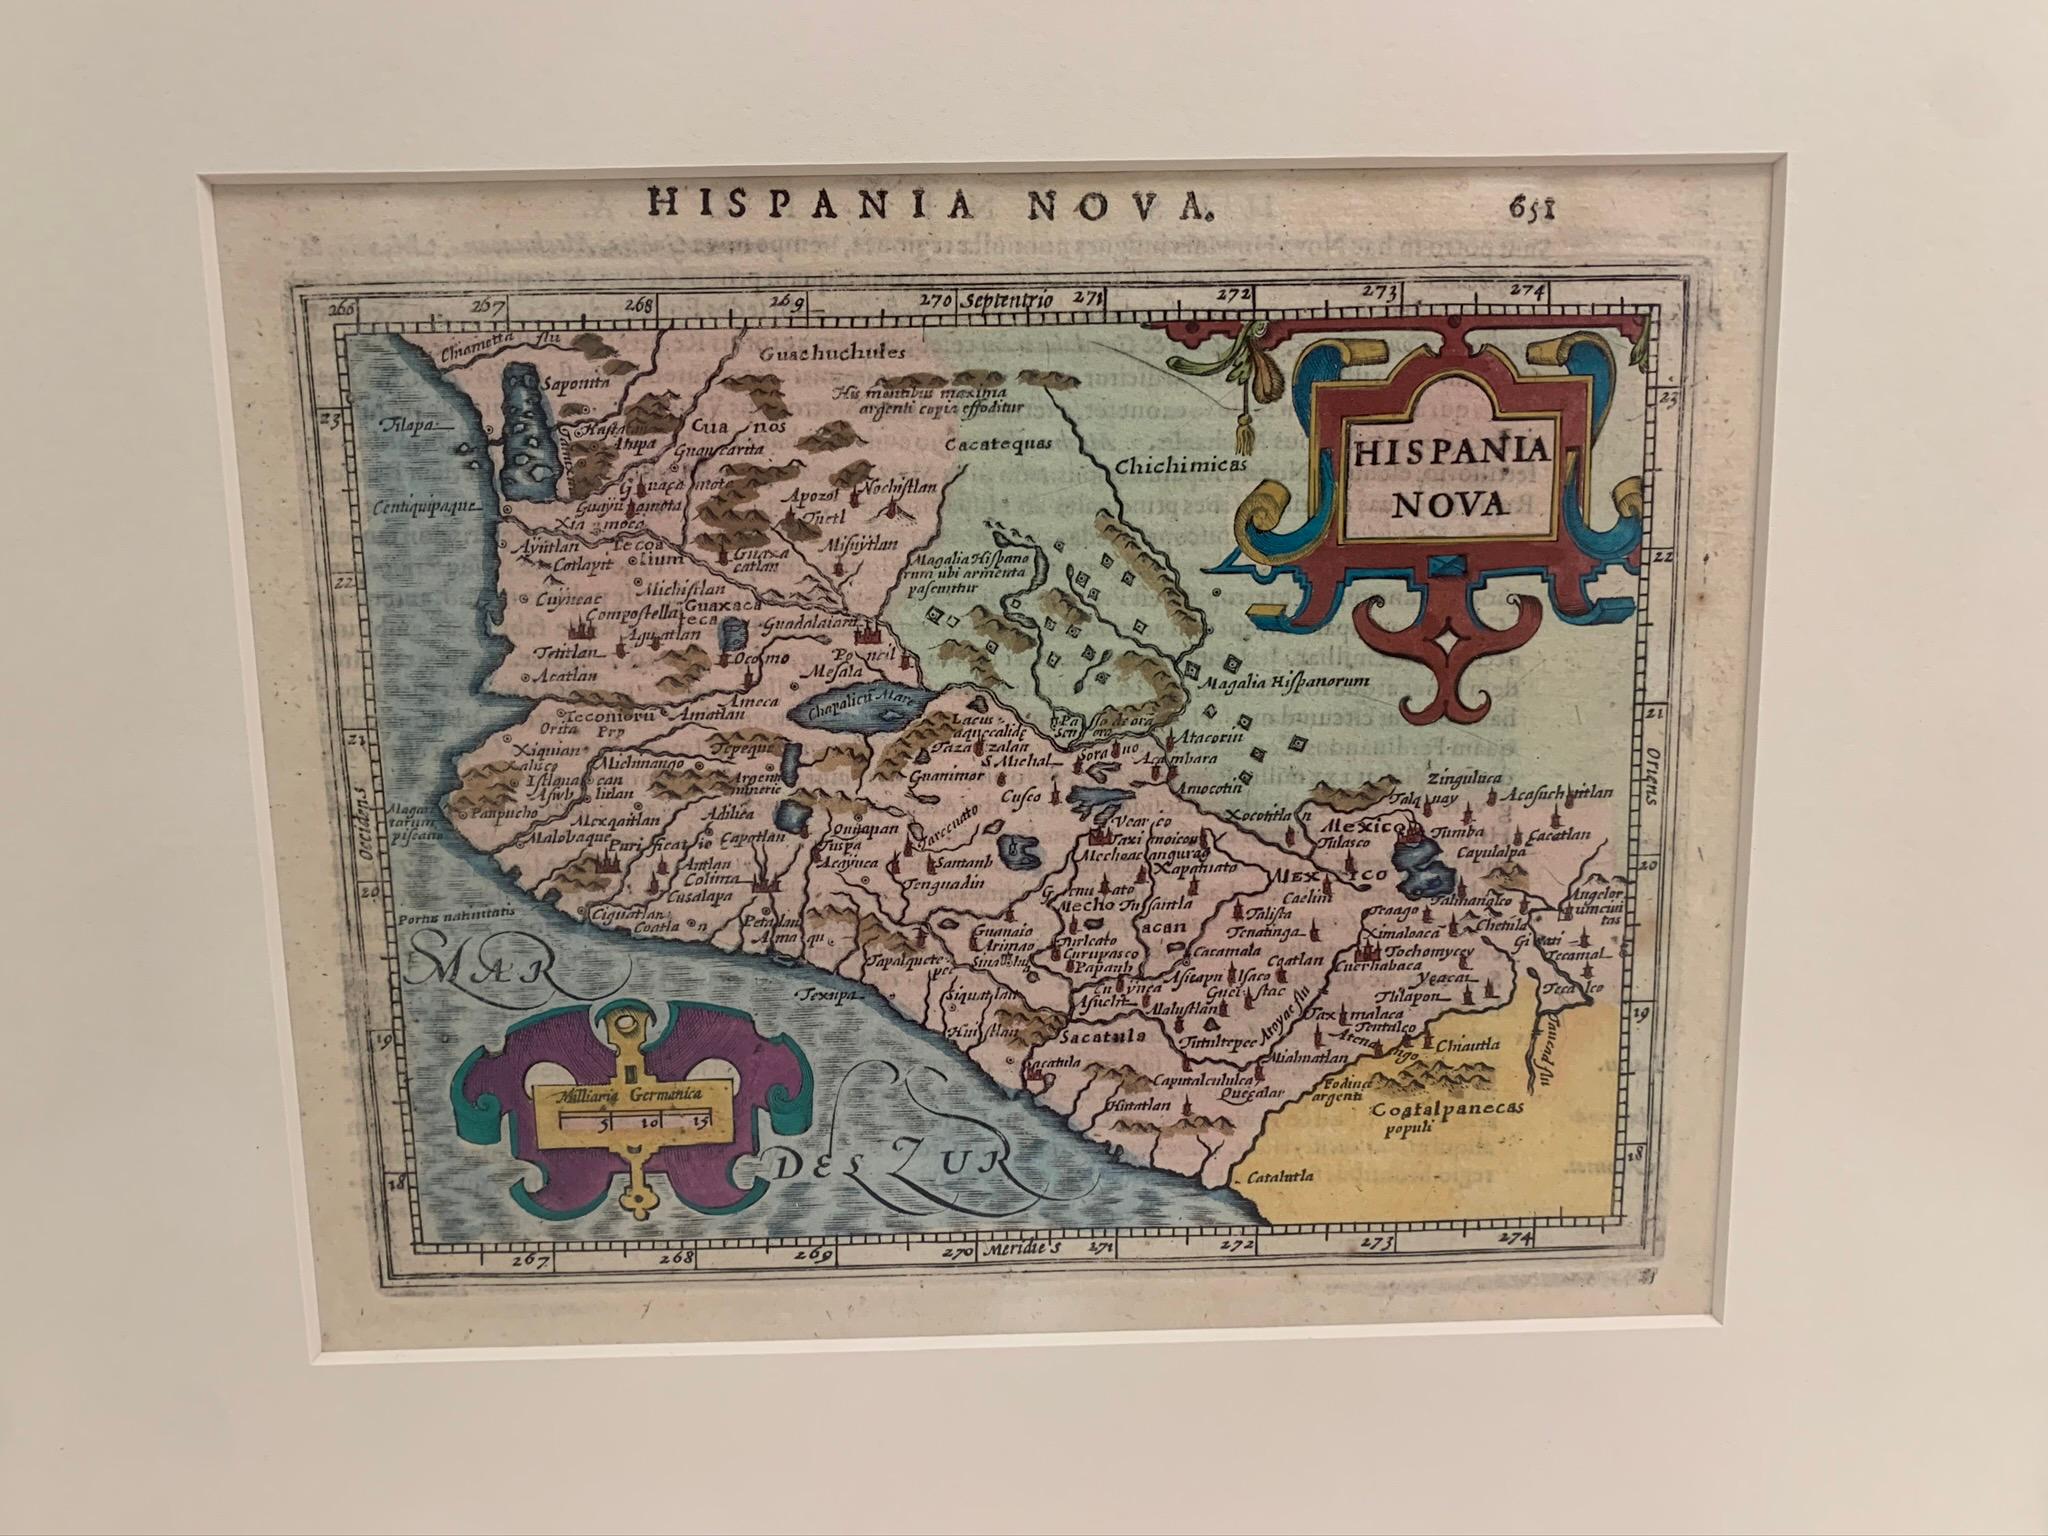 Framed colored example of this decorative and important minature map. Newly framed in brown wood frame with gold trim. 
Mercator Hondius “Atlas Minor” published in Amsterdam in 1648 at Jannsonius with a copy of the original german text on verso.